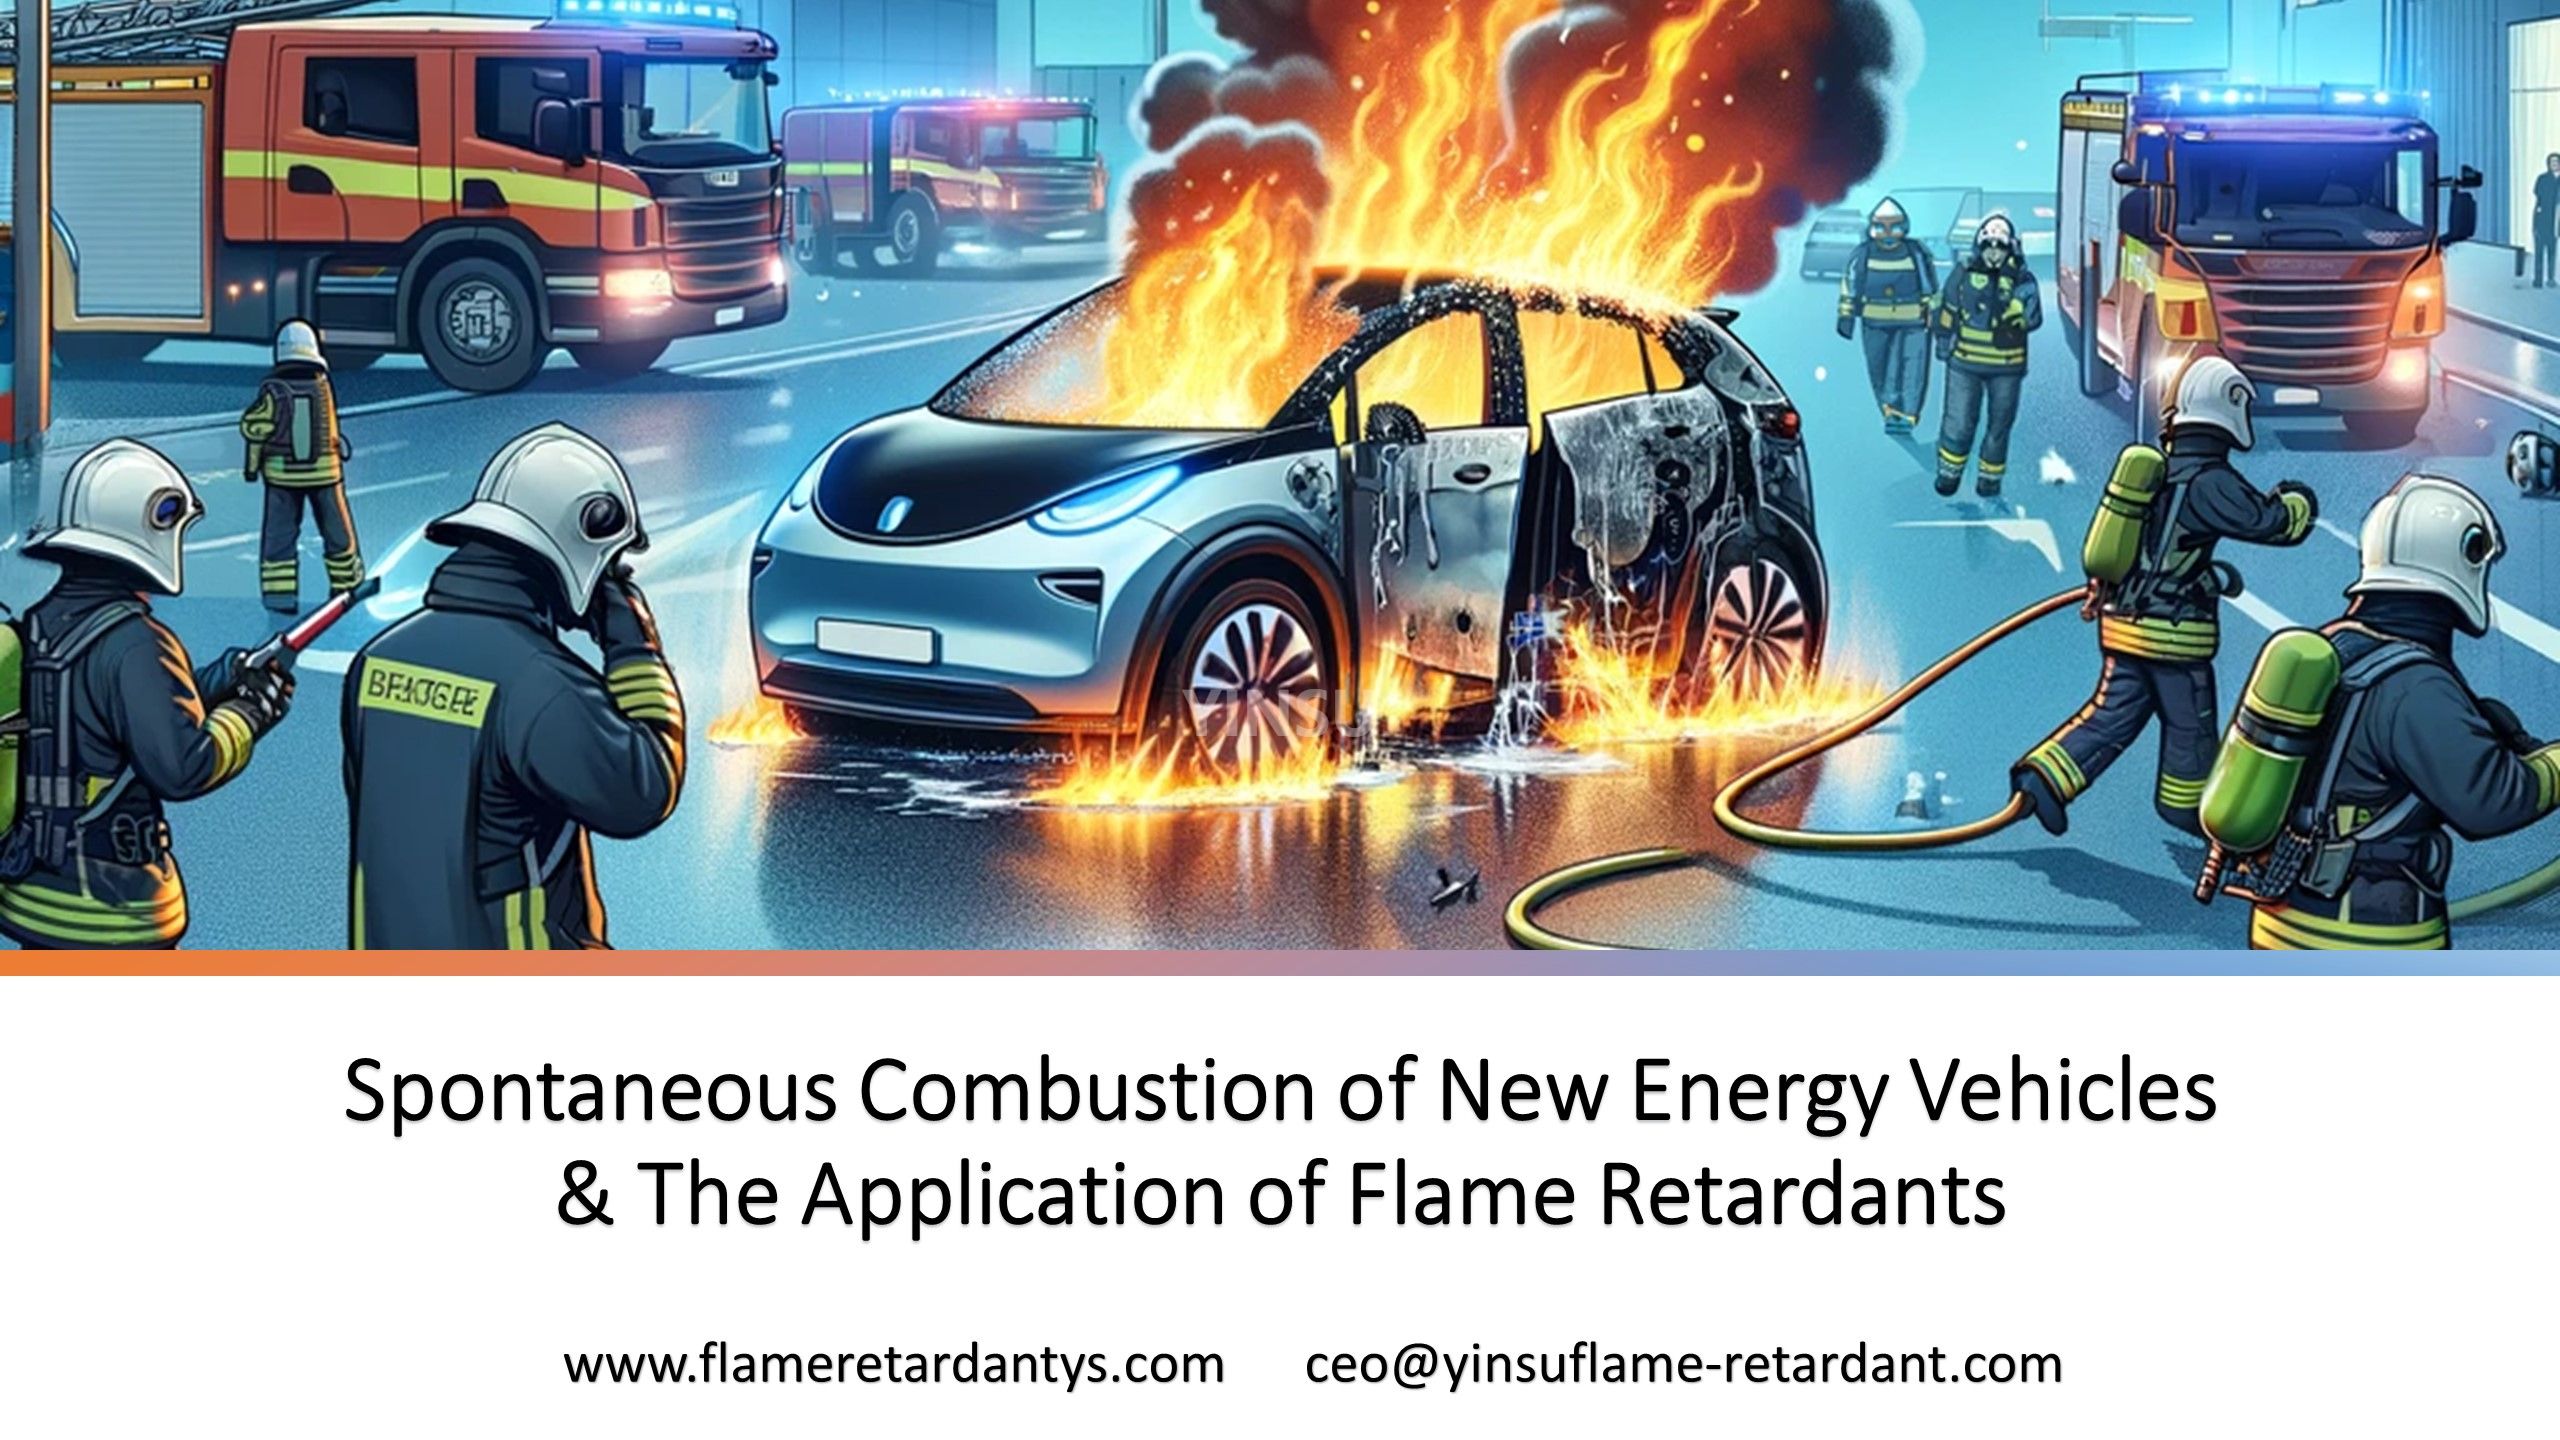 Spontaneous Combustion of New Energy Vehicles And The Application of Flame Retardants